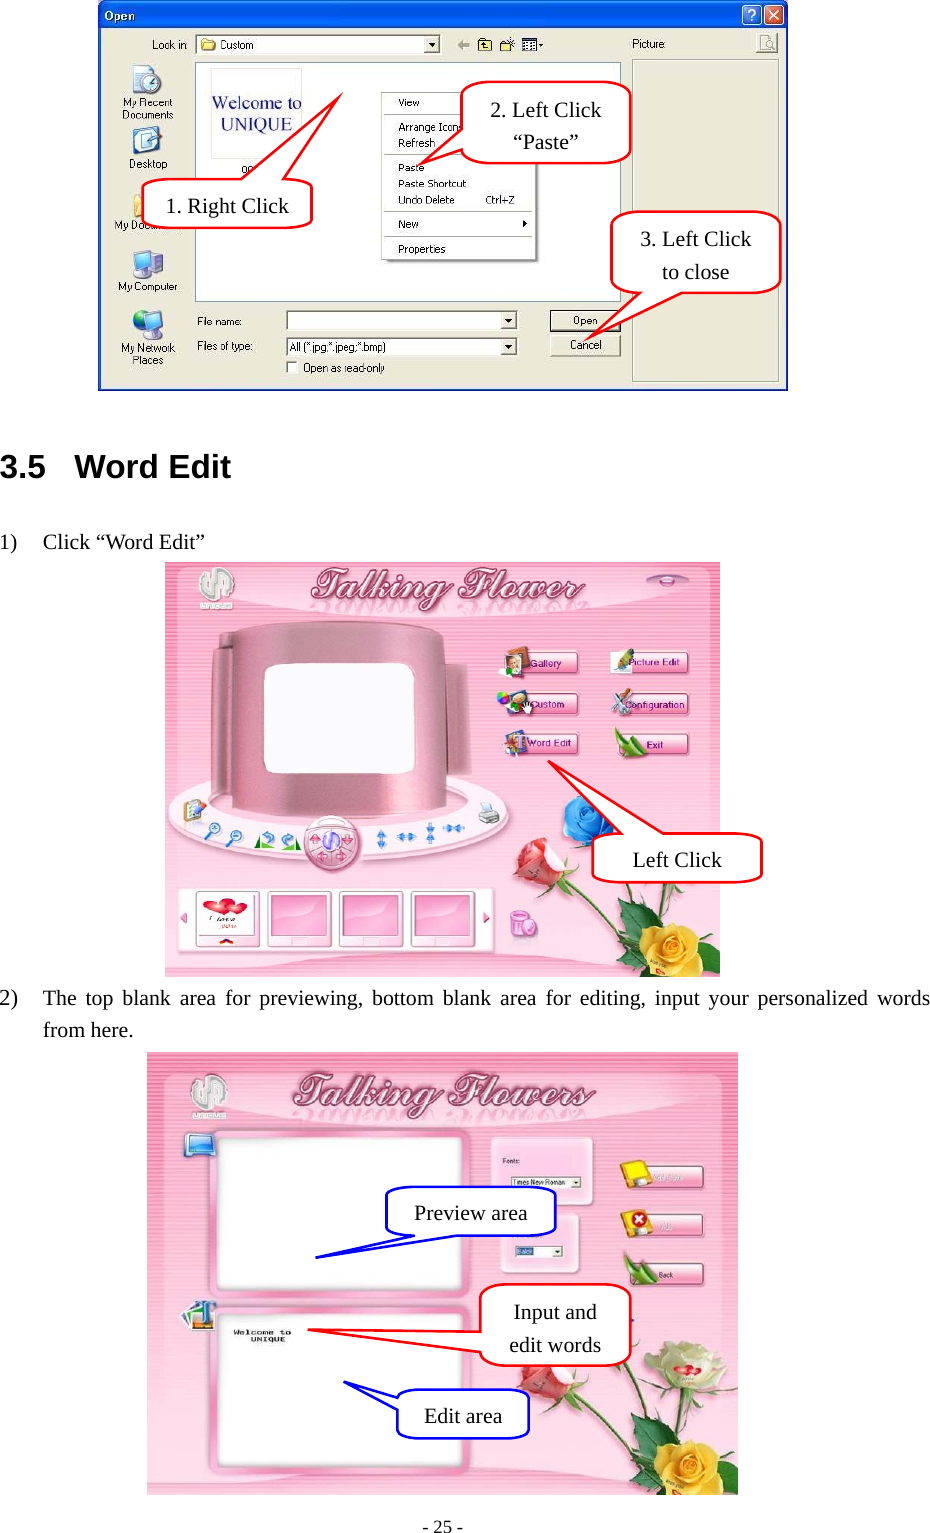 - 25 -  3.5 Word Edit 1) Click “Word Edit”  2) The top blank area for previewing, bottom blank area for editing, input your personalized words from here.  Input and edit wordsLeft Click Preview areaEdit area2. Left Click “Paste”1. Right Click 3. Left Click to close 